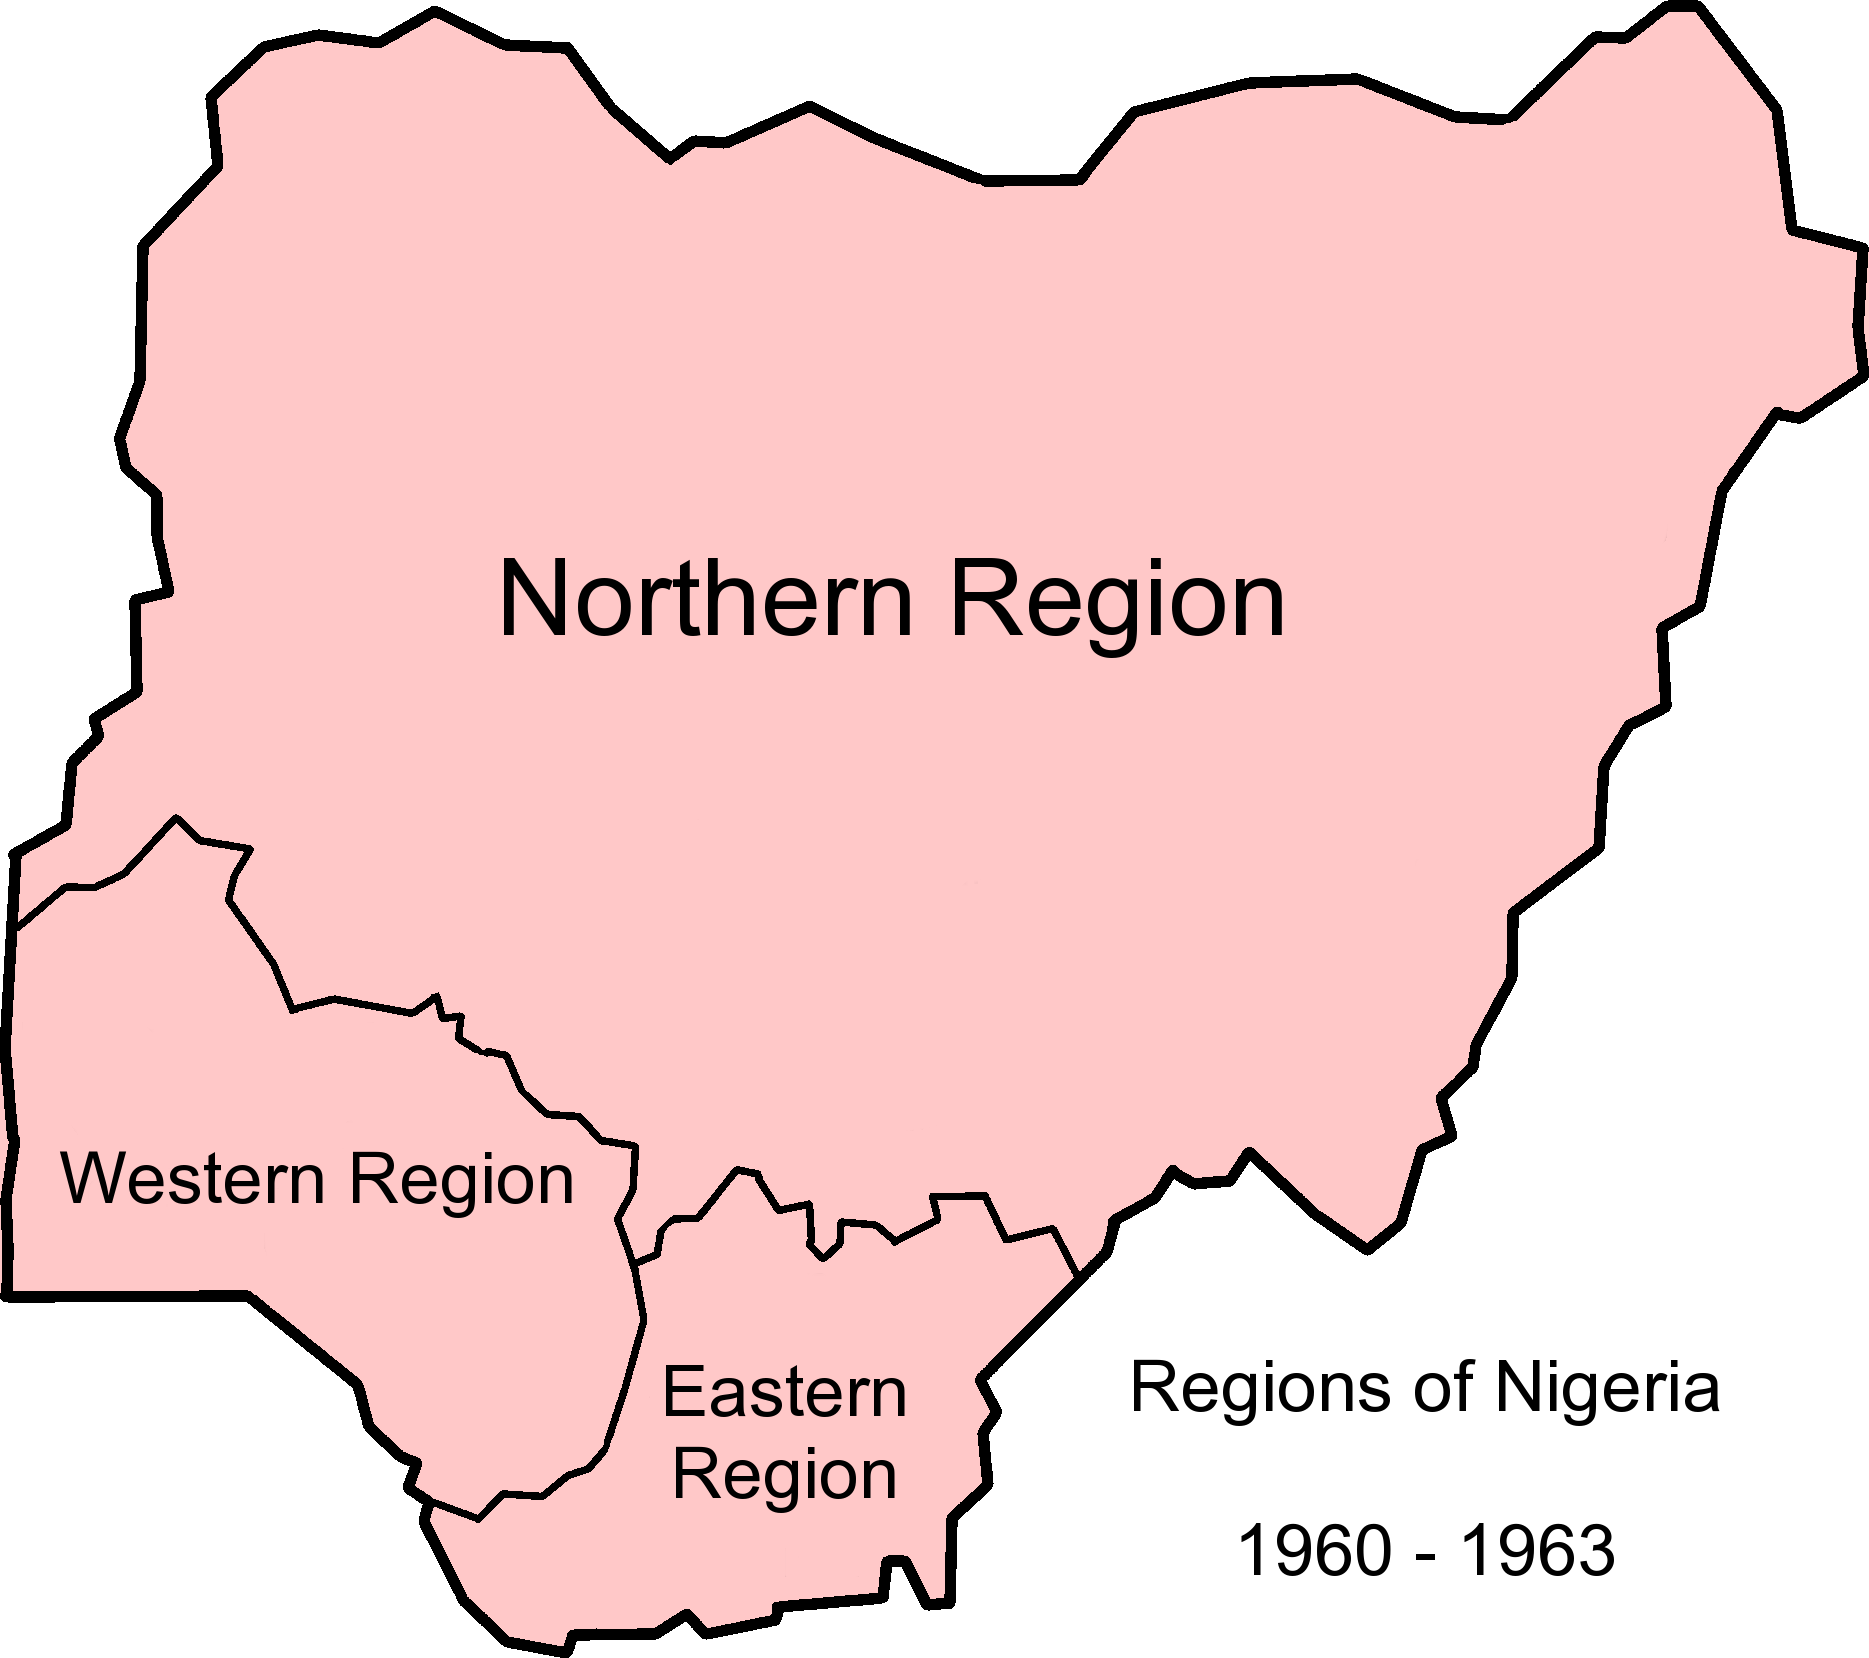 File:Nigeria 1960-1963.png - Wikimedia Commons